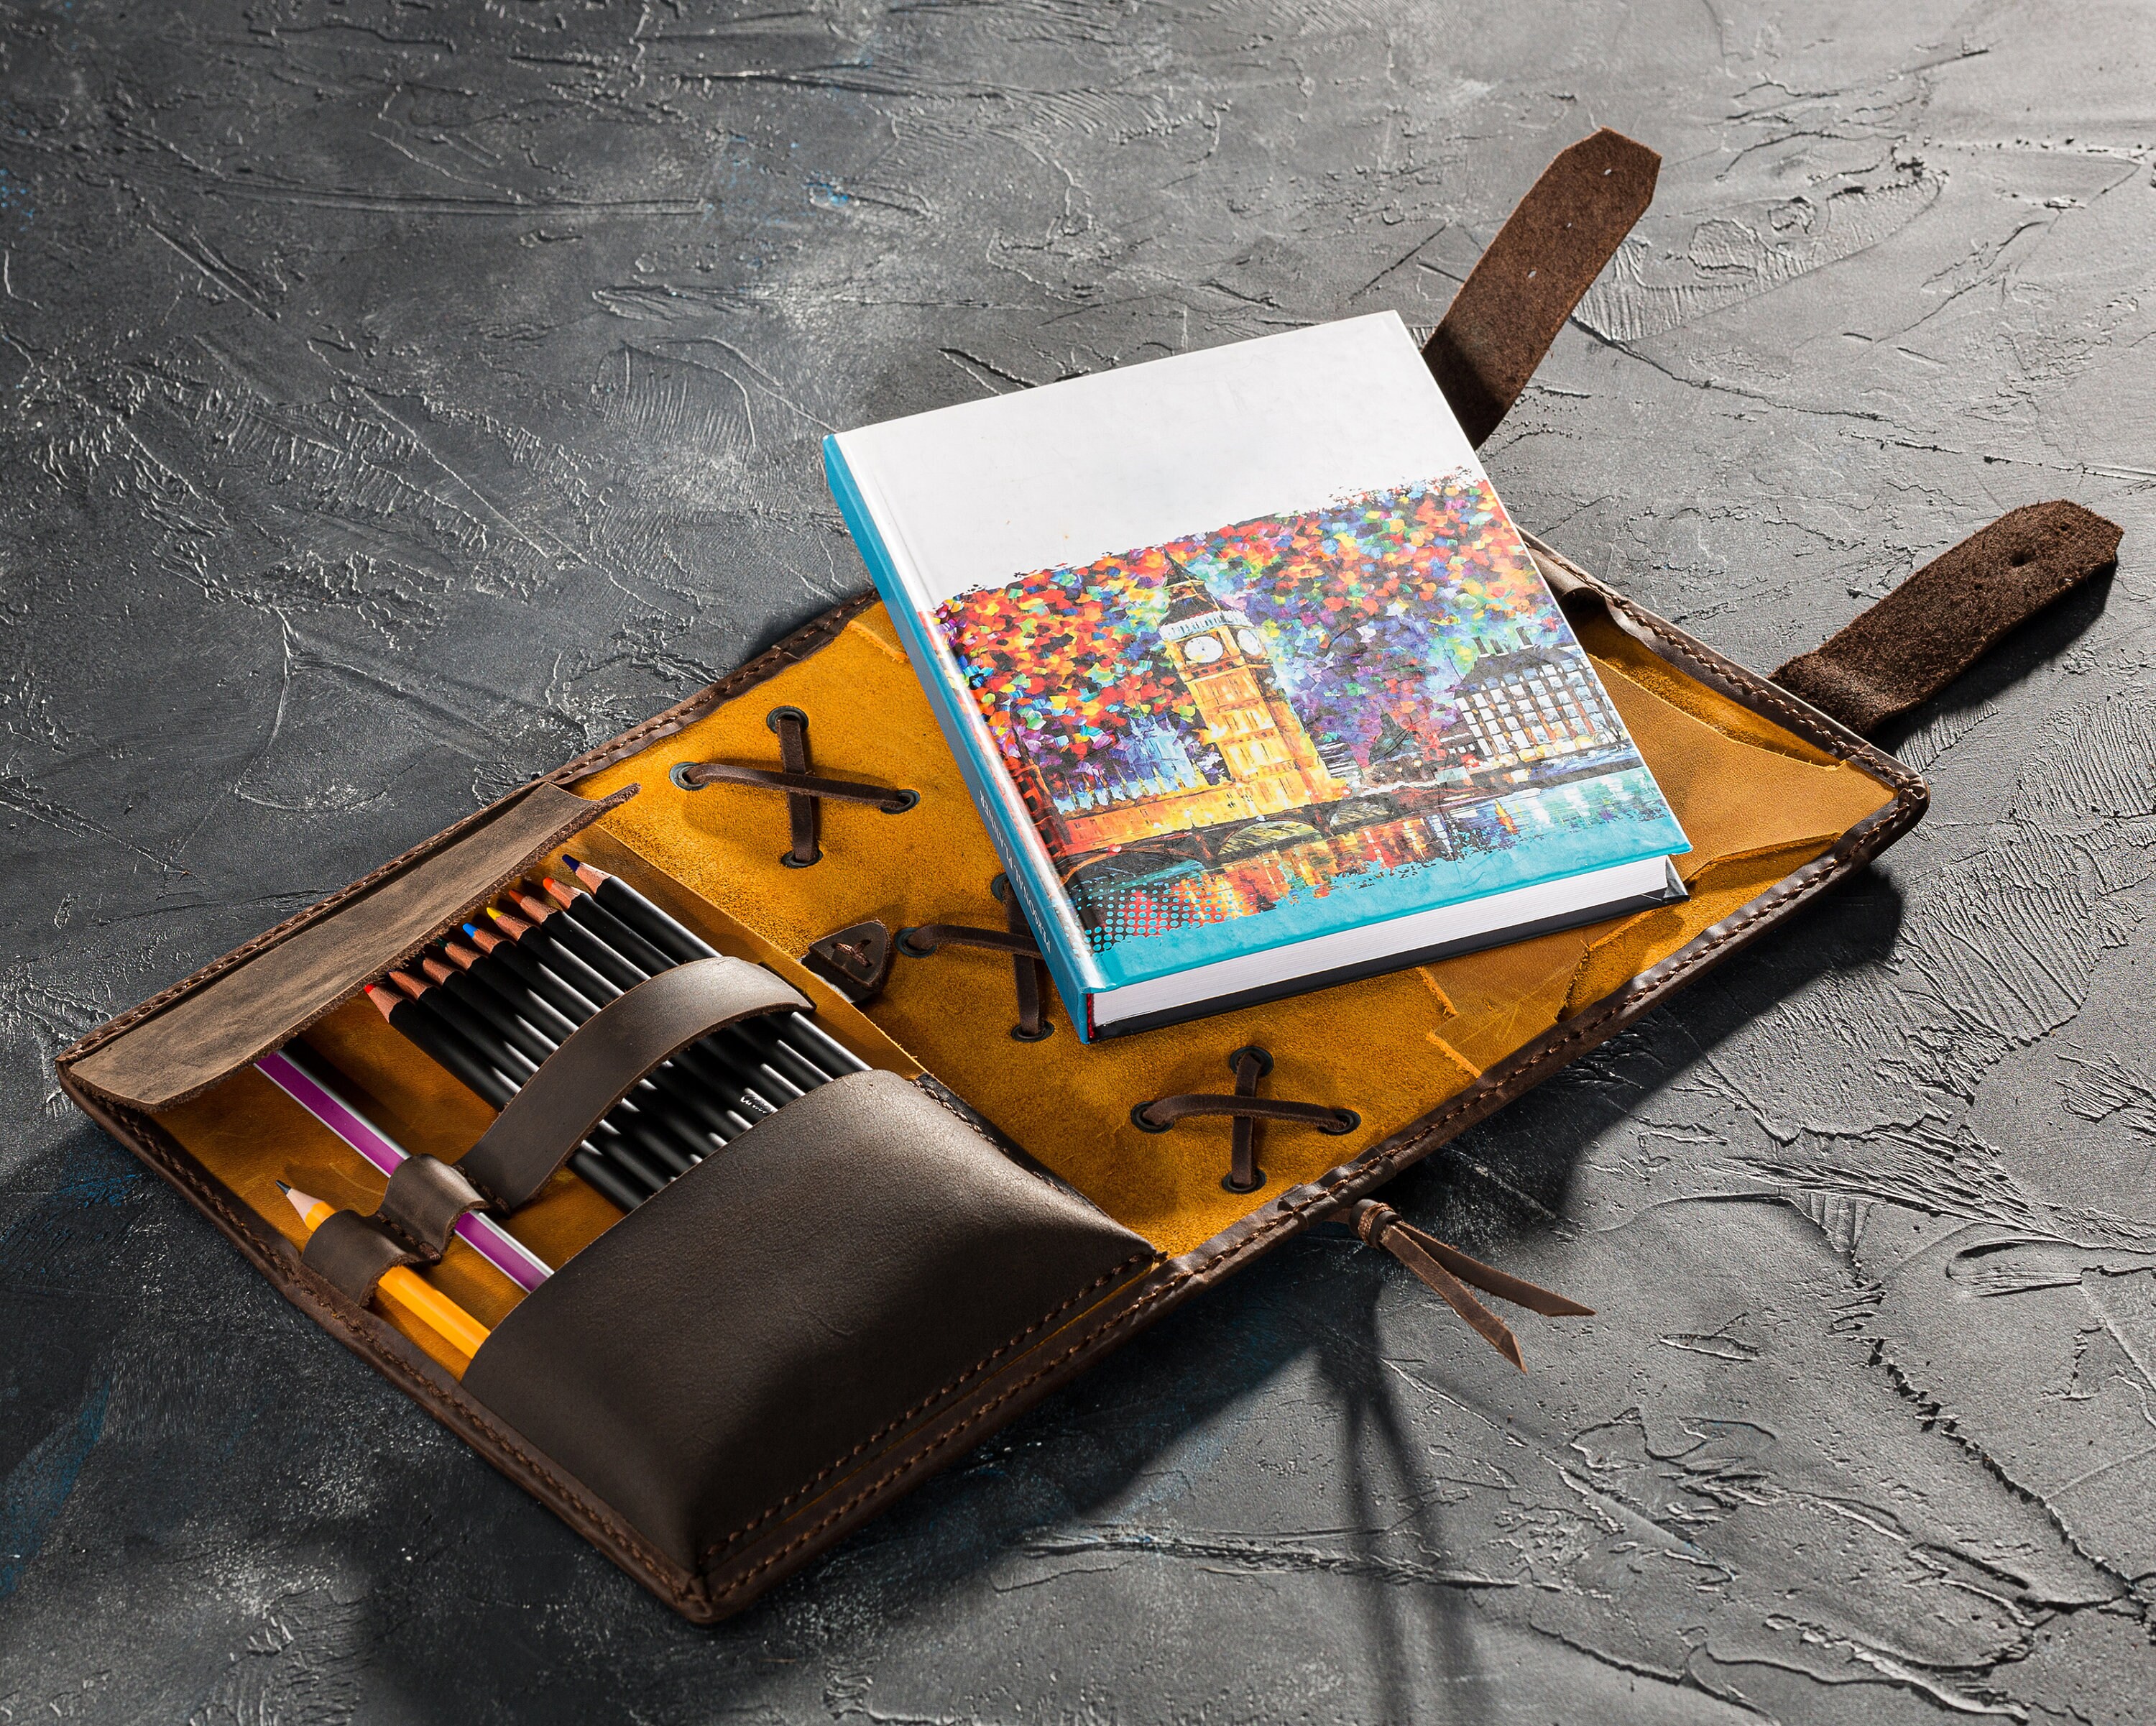 Artist Gifts Set of Sketch Pad Pencils and Personalized Leather